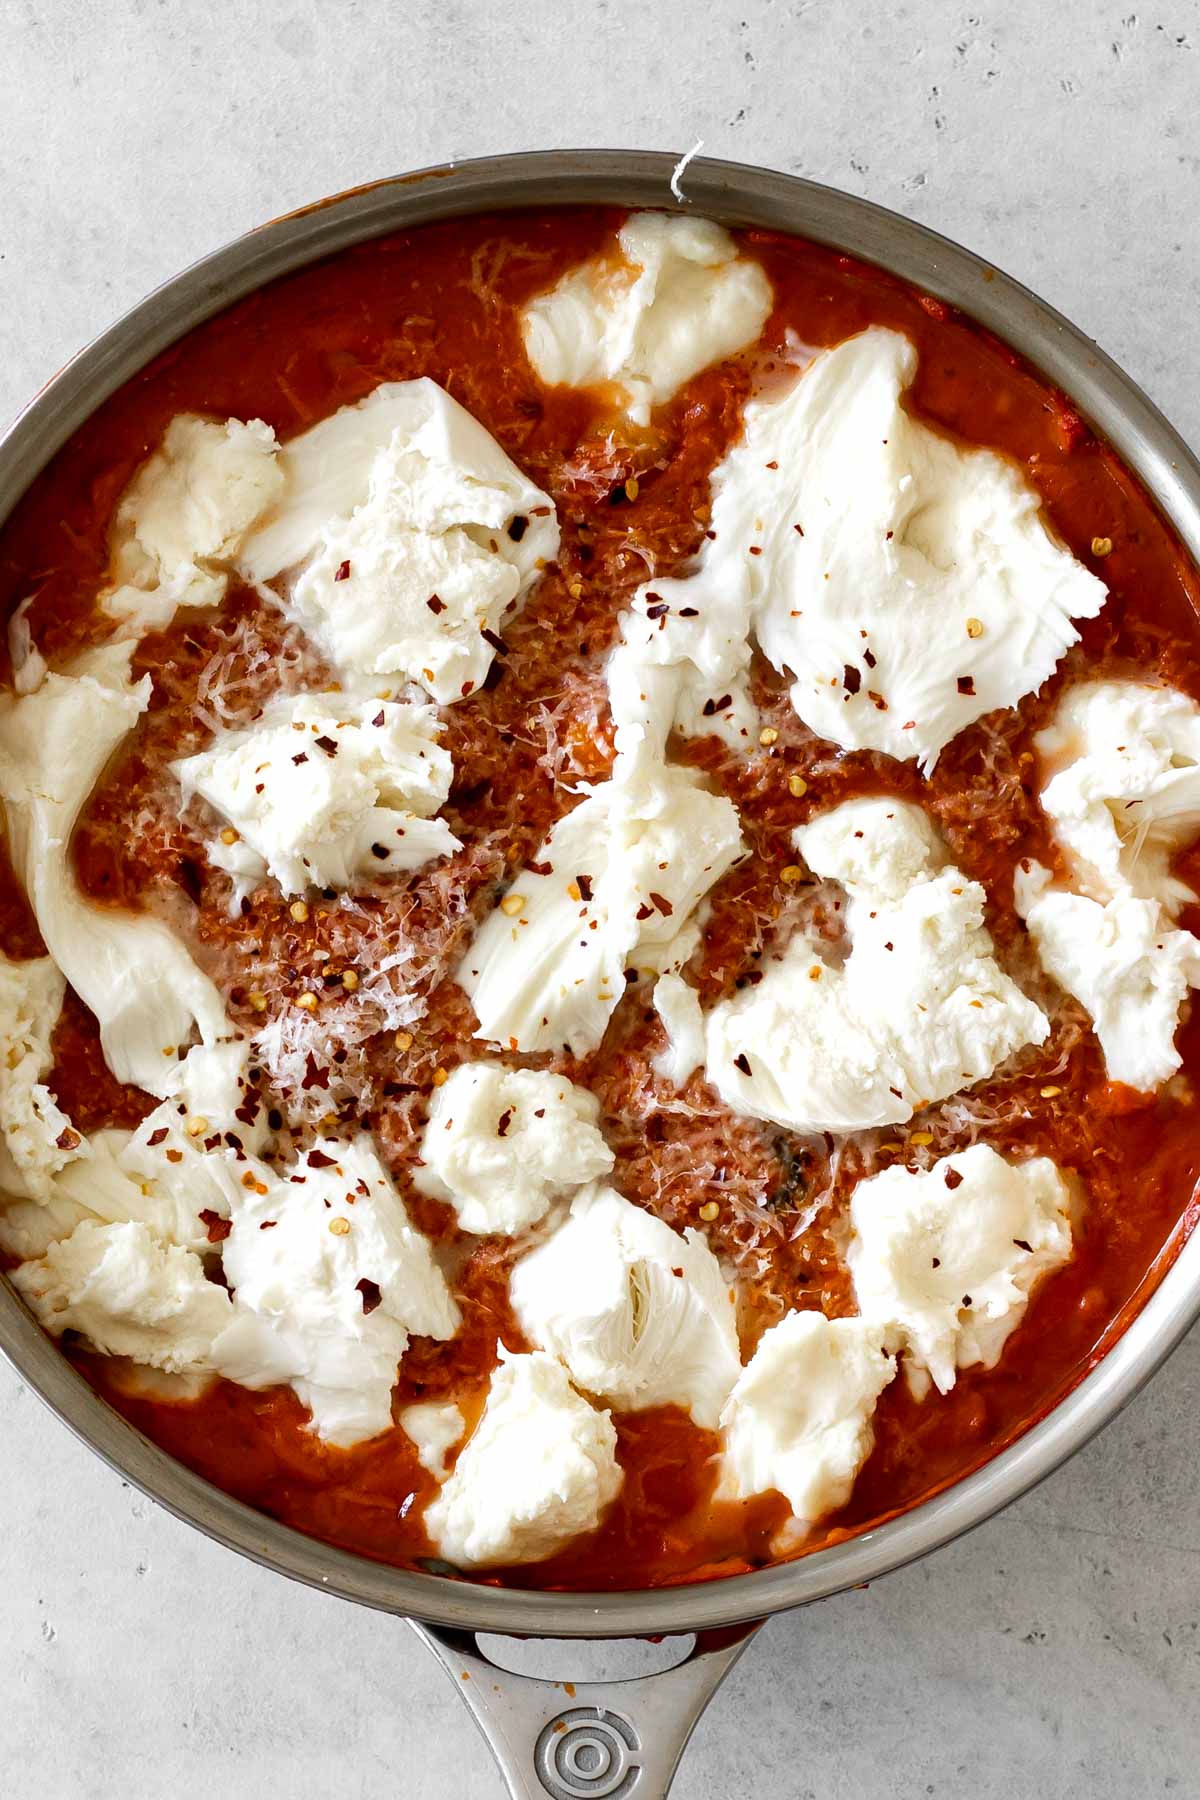 mozzarella shredded and laid overtop vodka sauce with red pepper flakes.